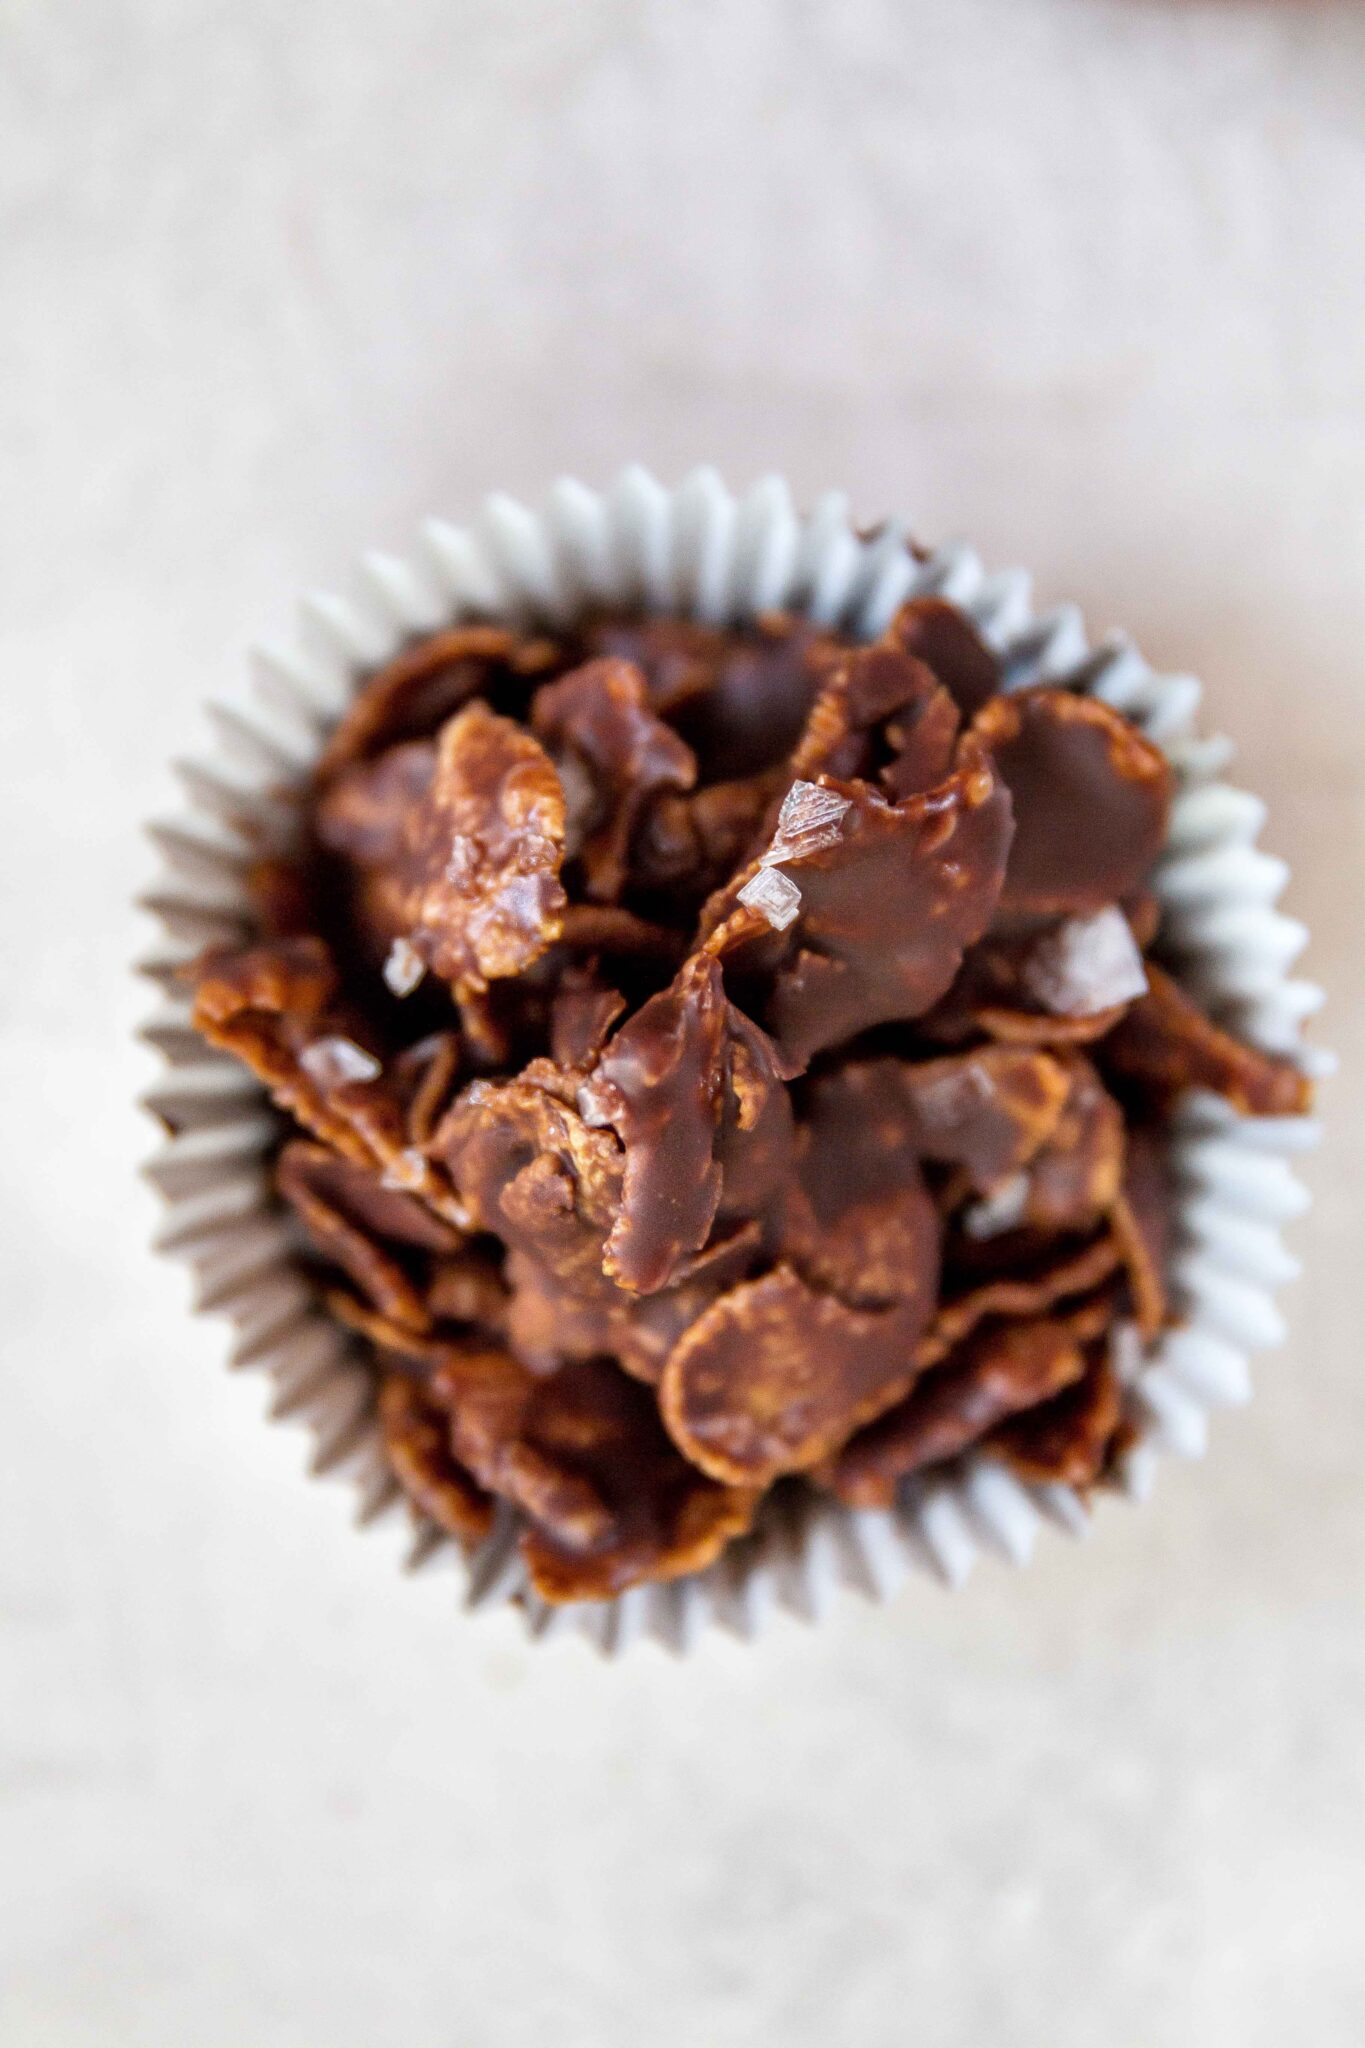 Chocolate Covered Cornflakes - I Will Not Eat Oysters